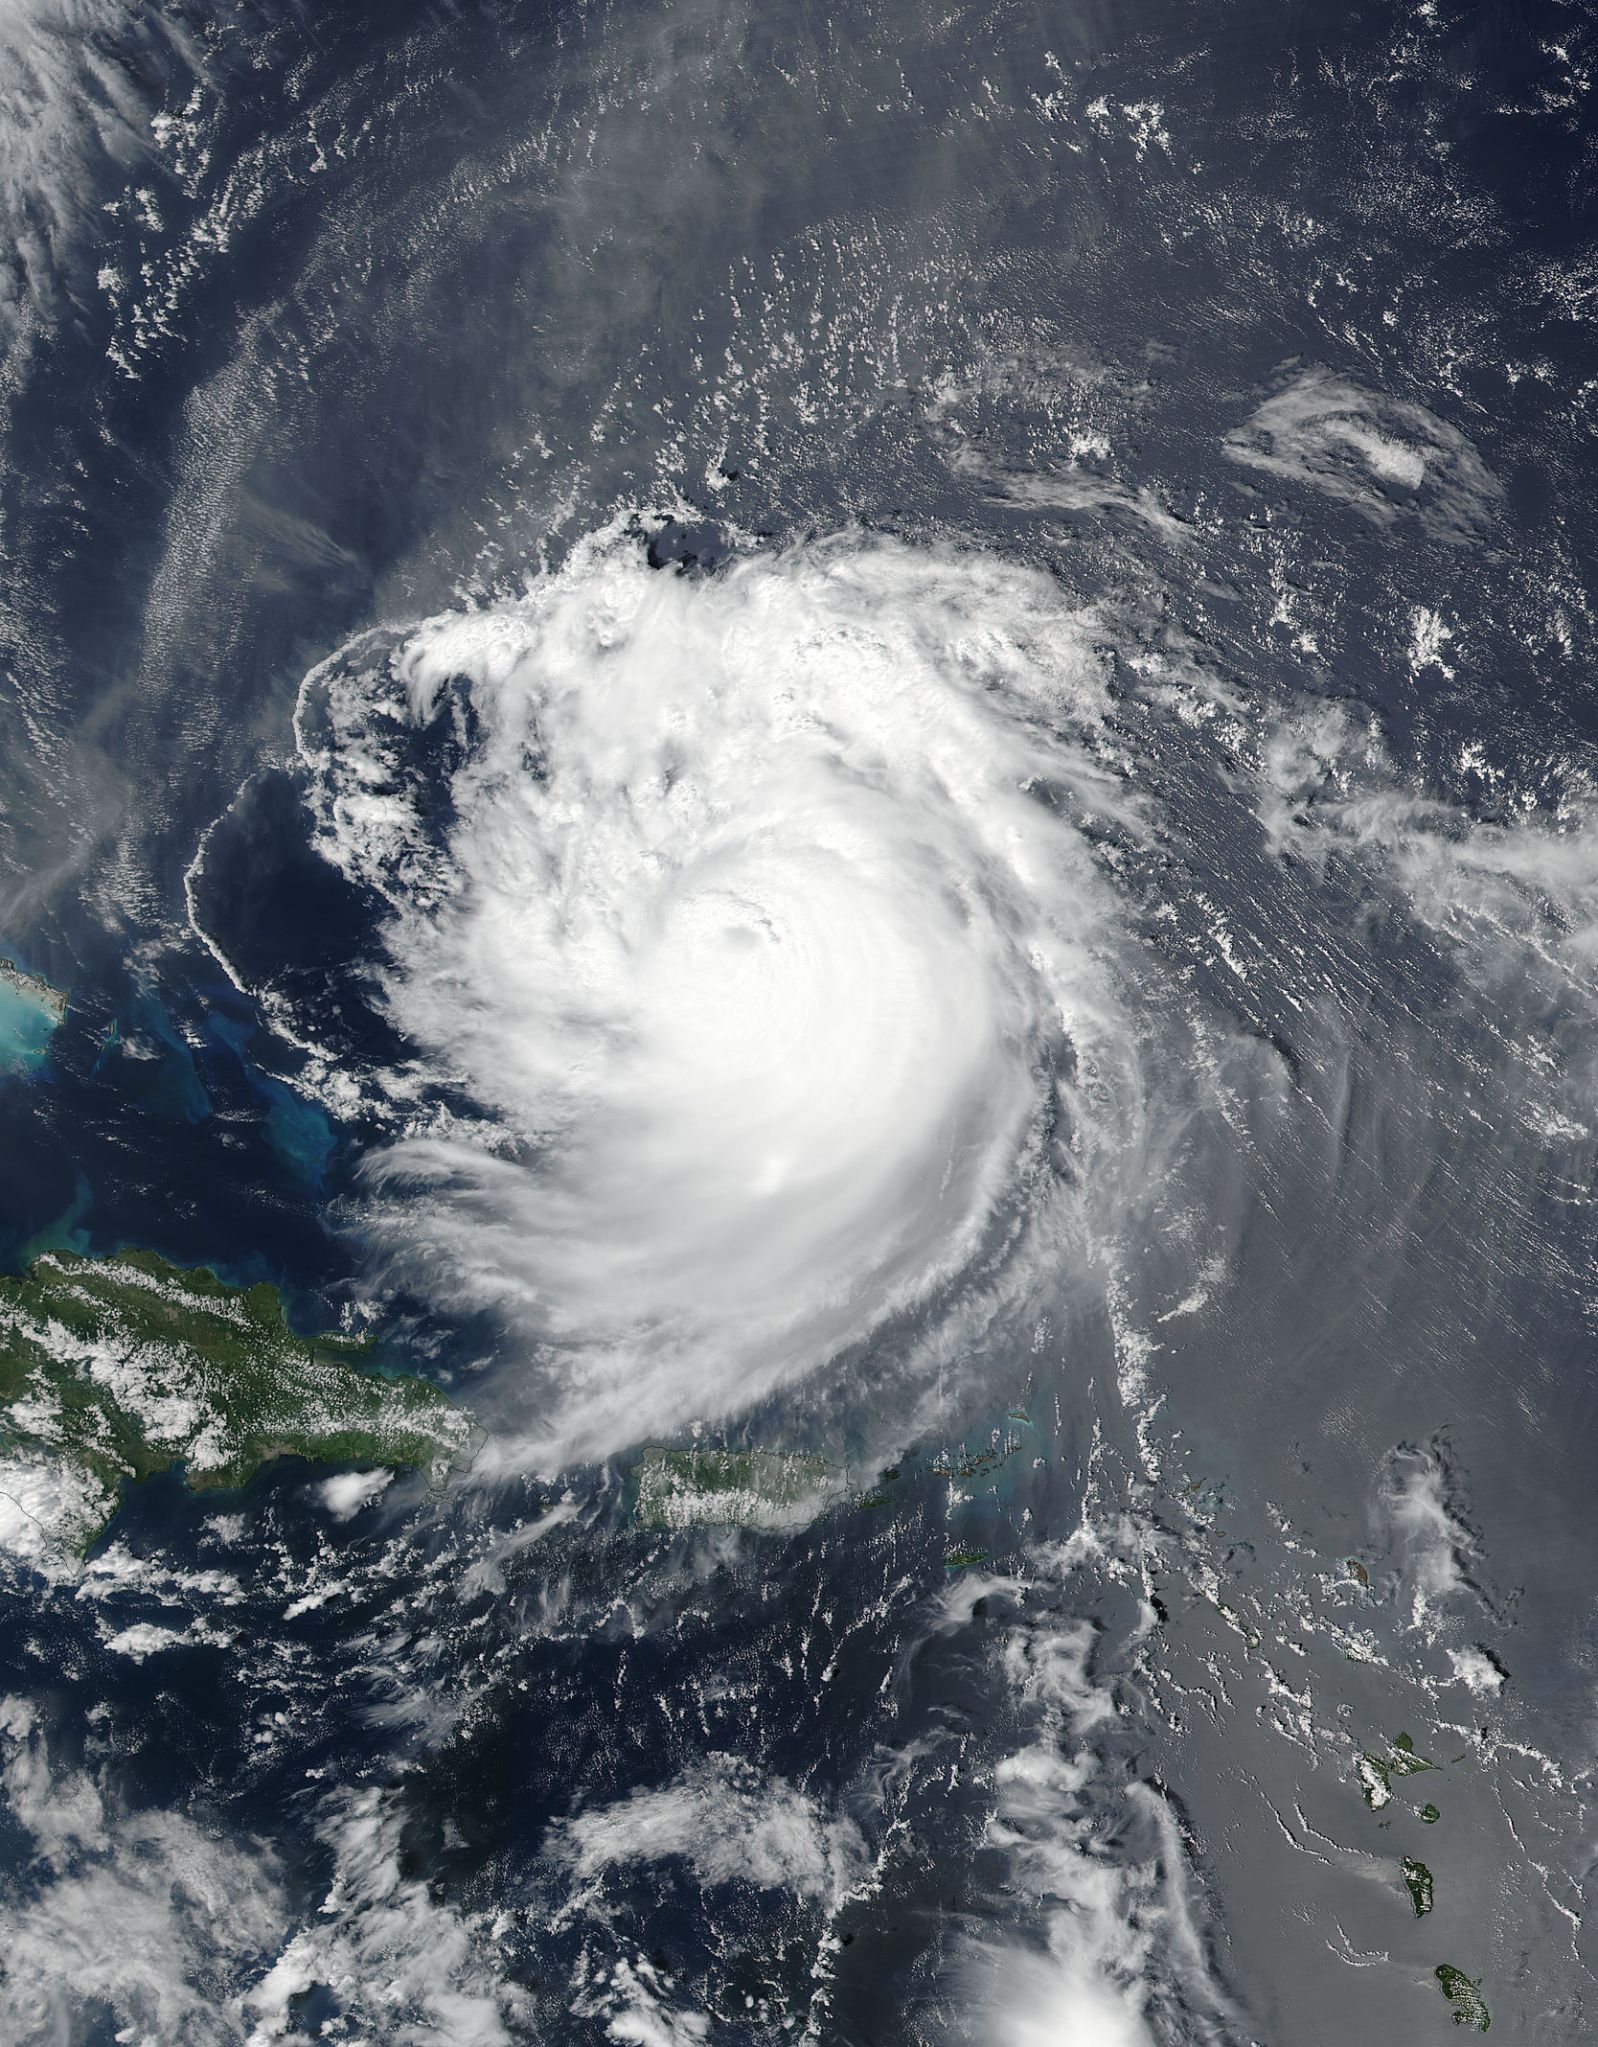 Satellite image of Jose, a swirling mass of clouds in the Atlantic Ocean.